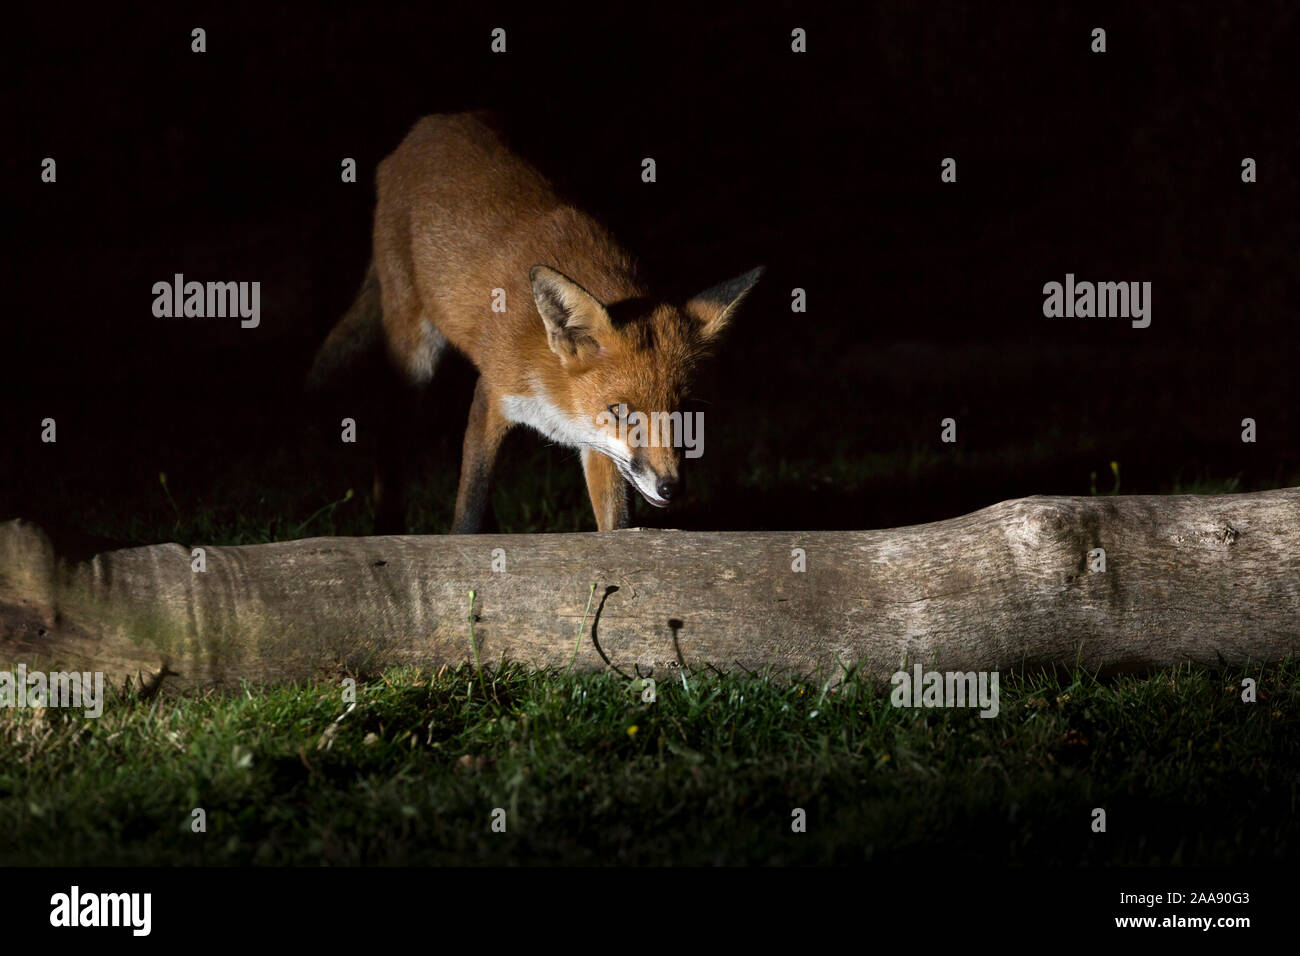 Front view close up of a wild, hungry, urban red fox (Vulpes vulpes) isolated in the dark, foraging for food in UK garden at night, lit by spotlight. Stock Photo